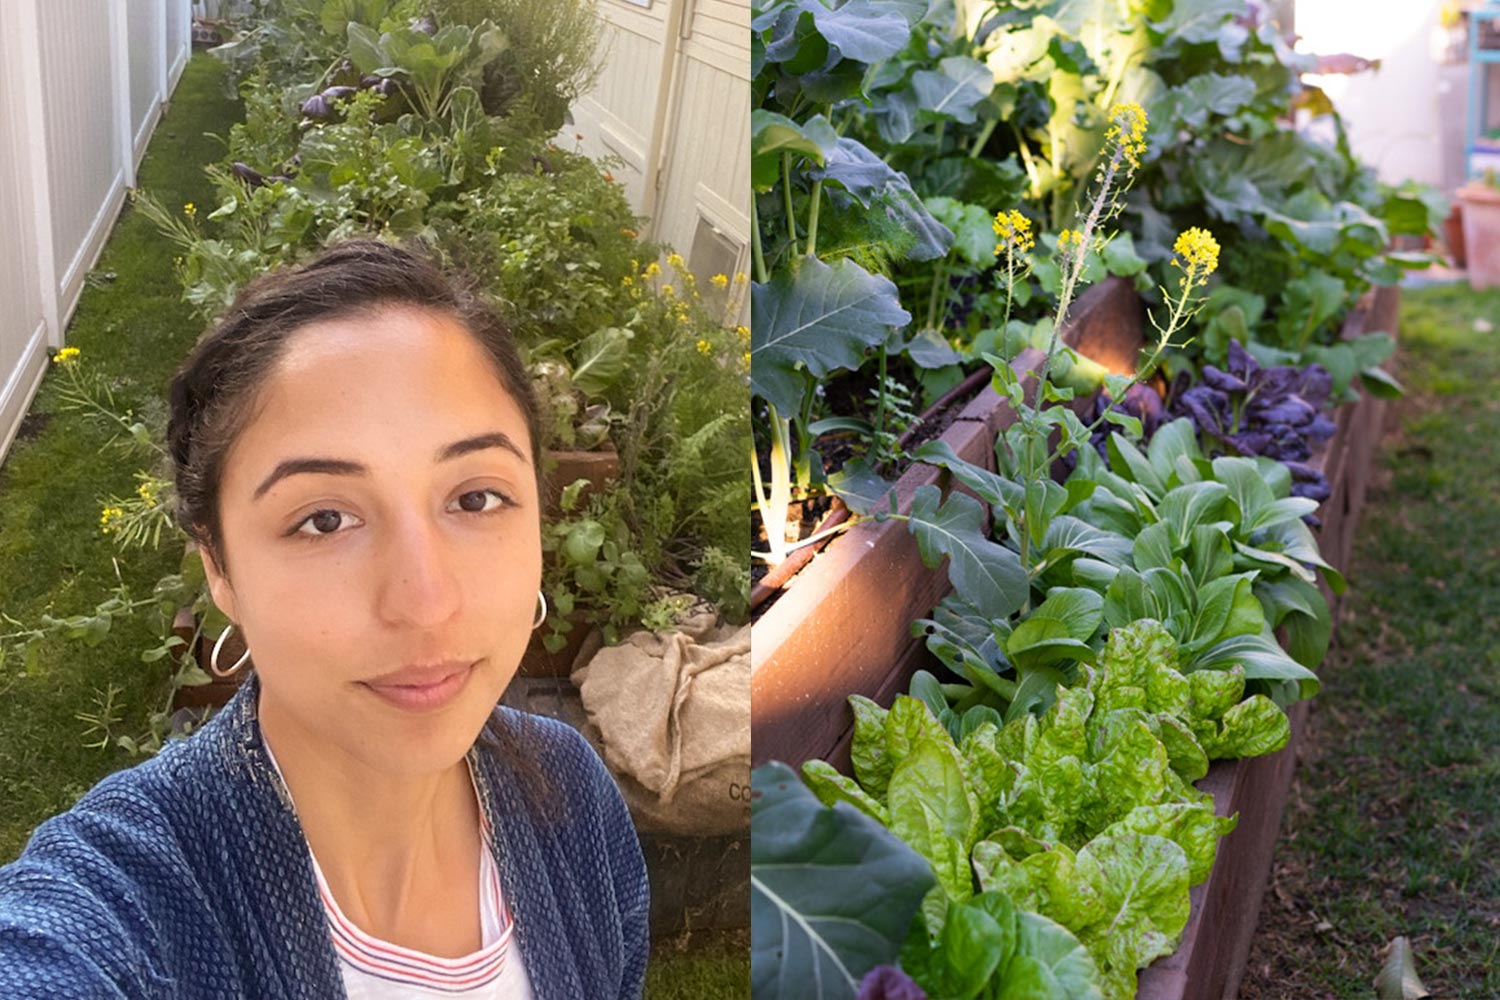 a woman standing in front of a long, narrow garden next to a building, and a close up of plants in a garden bed